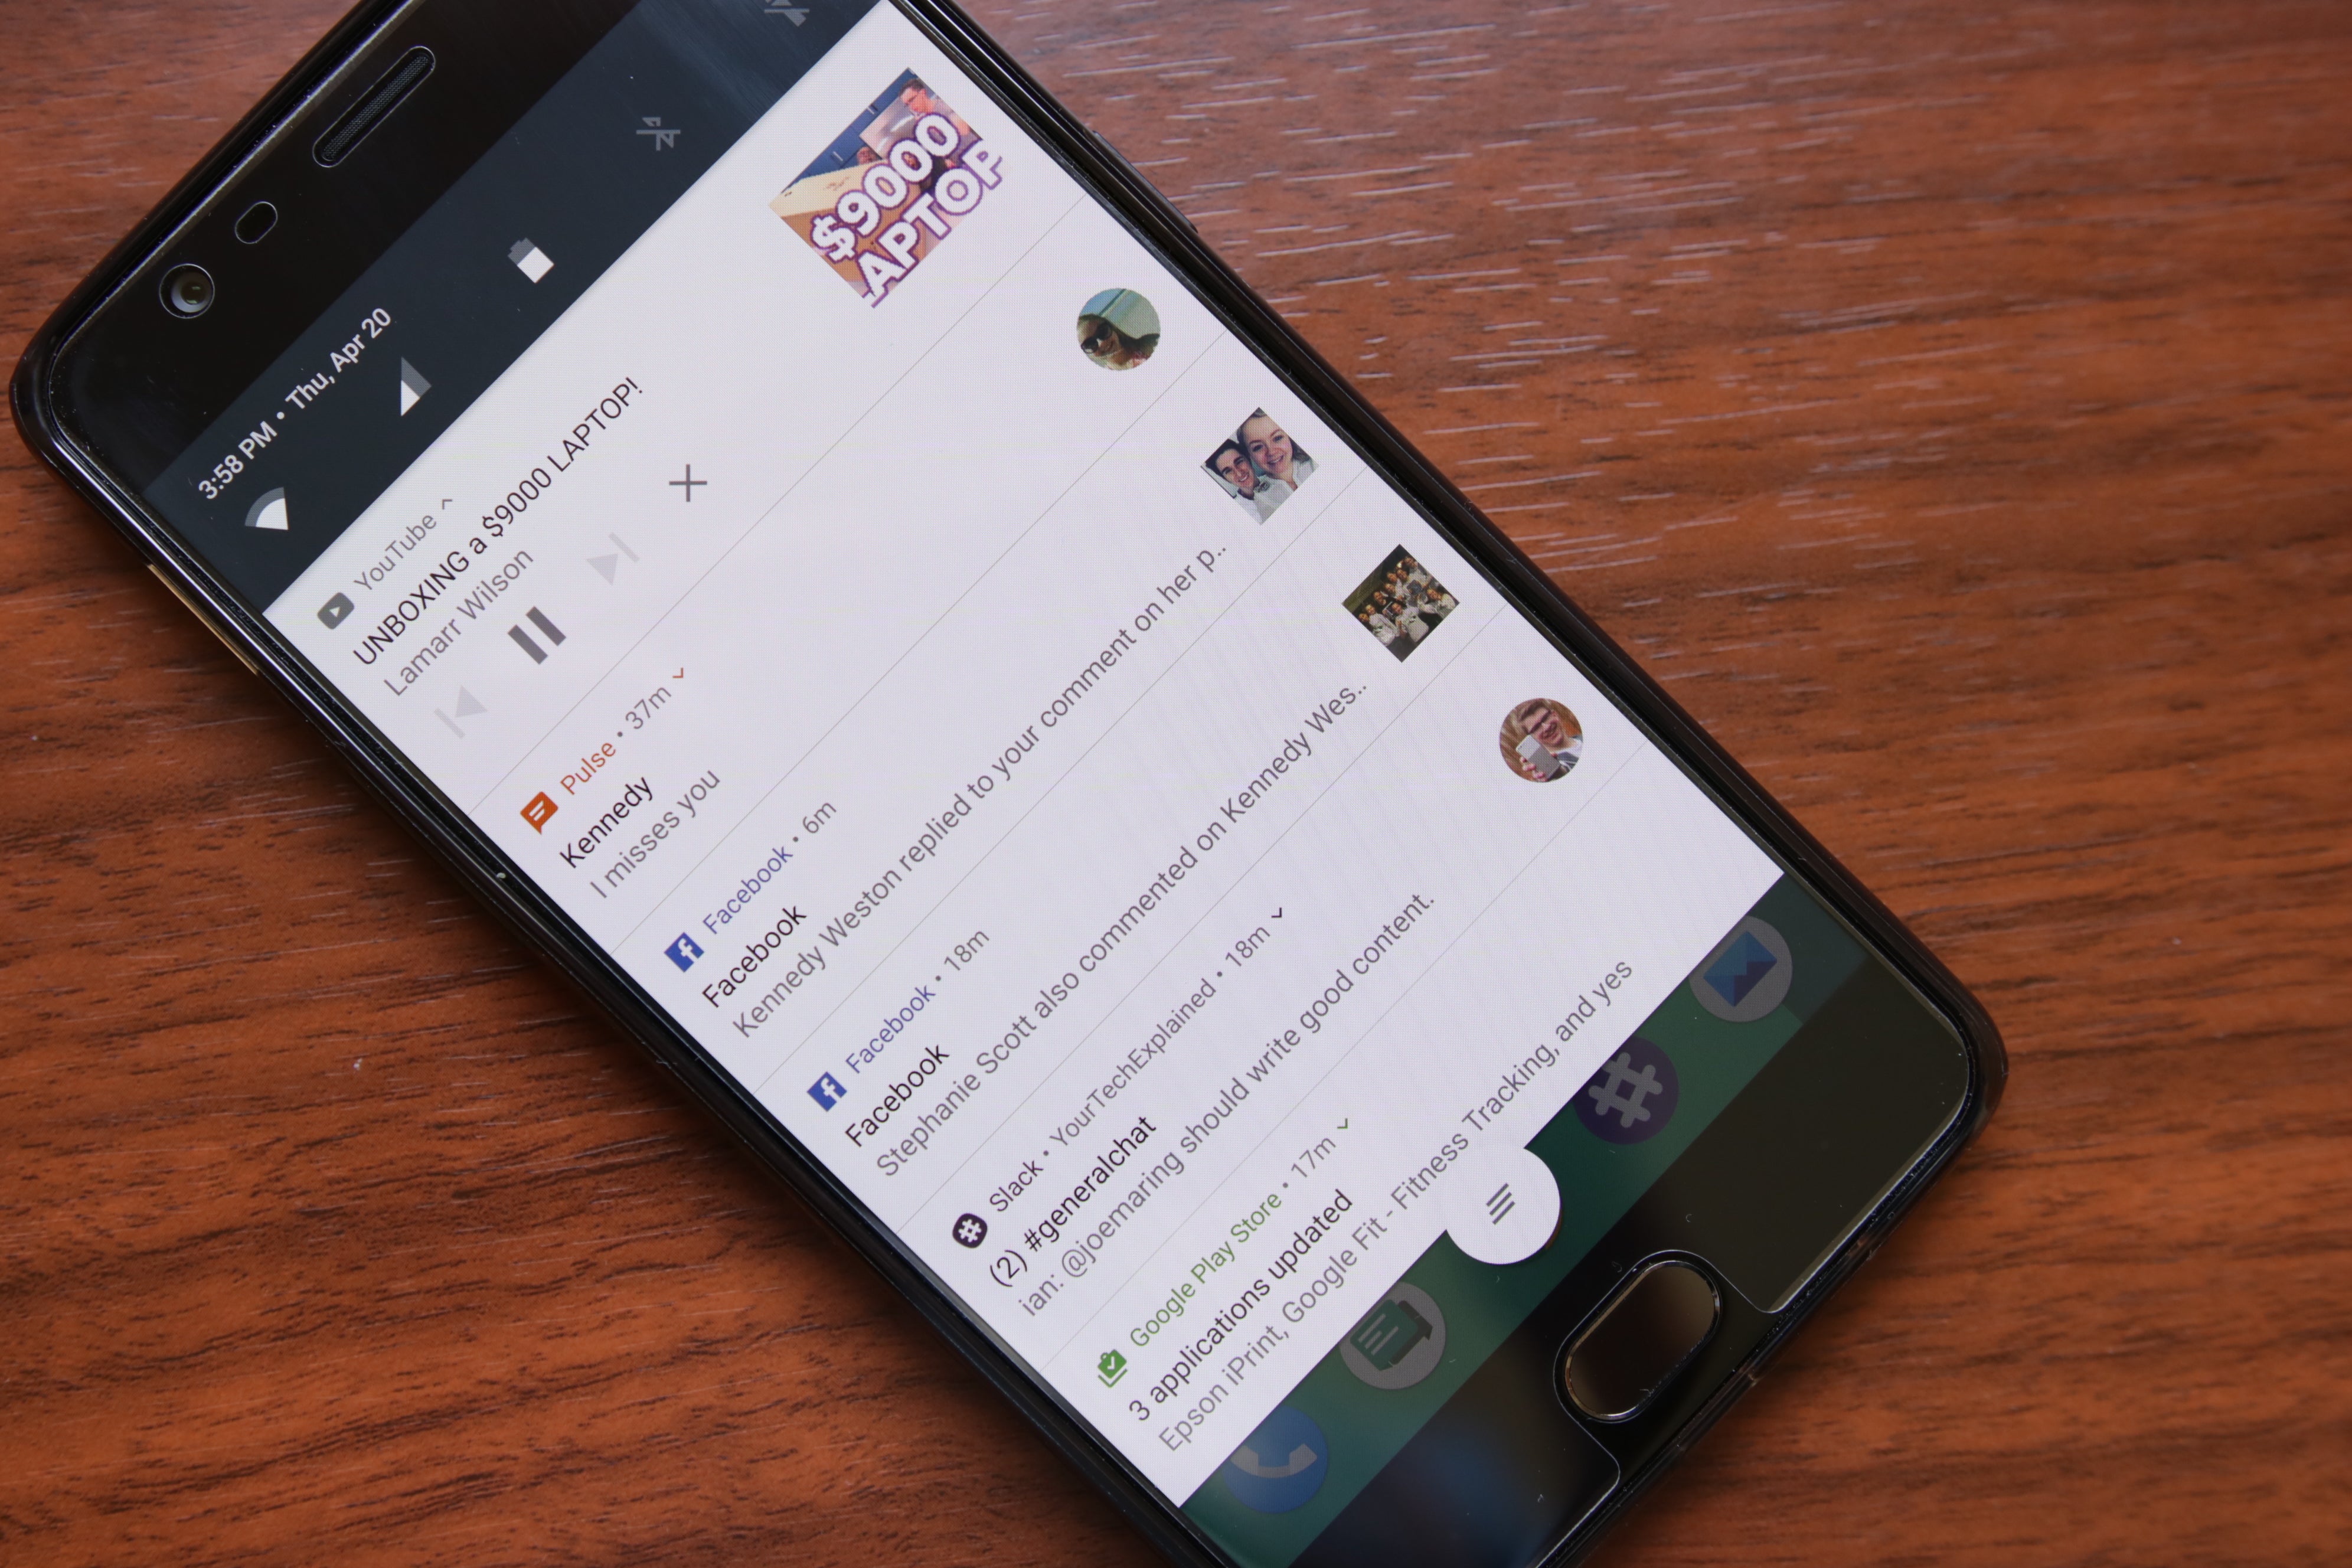 Google got it right with the concept of bundling similar notifications in Android Nougat - Why I'm going back to Android after using the iPhone for 5 months